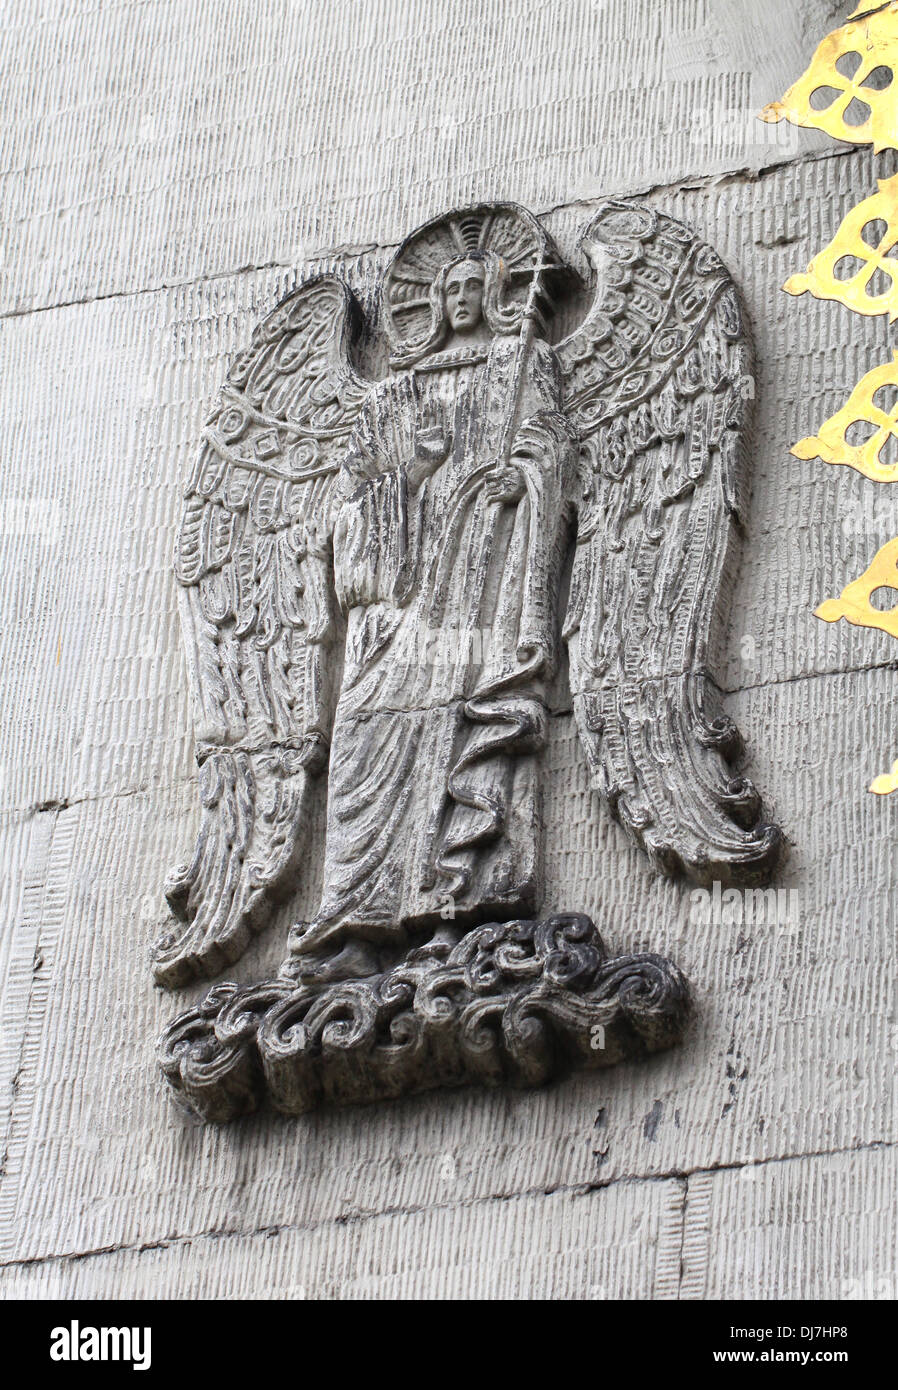 Bas-relief of angel on the wall Stock Photo